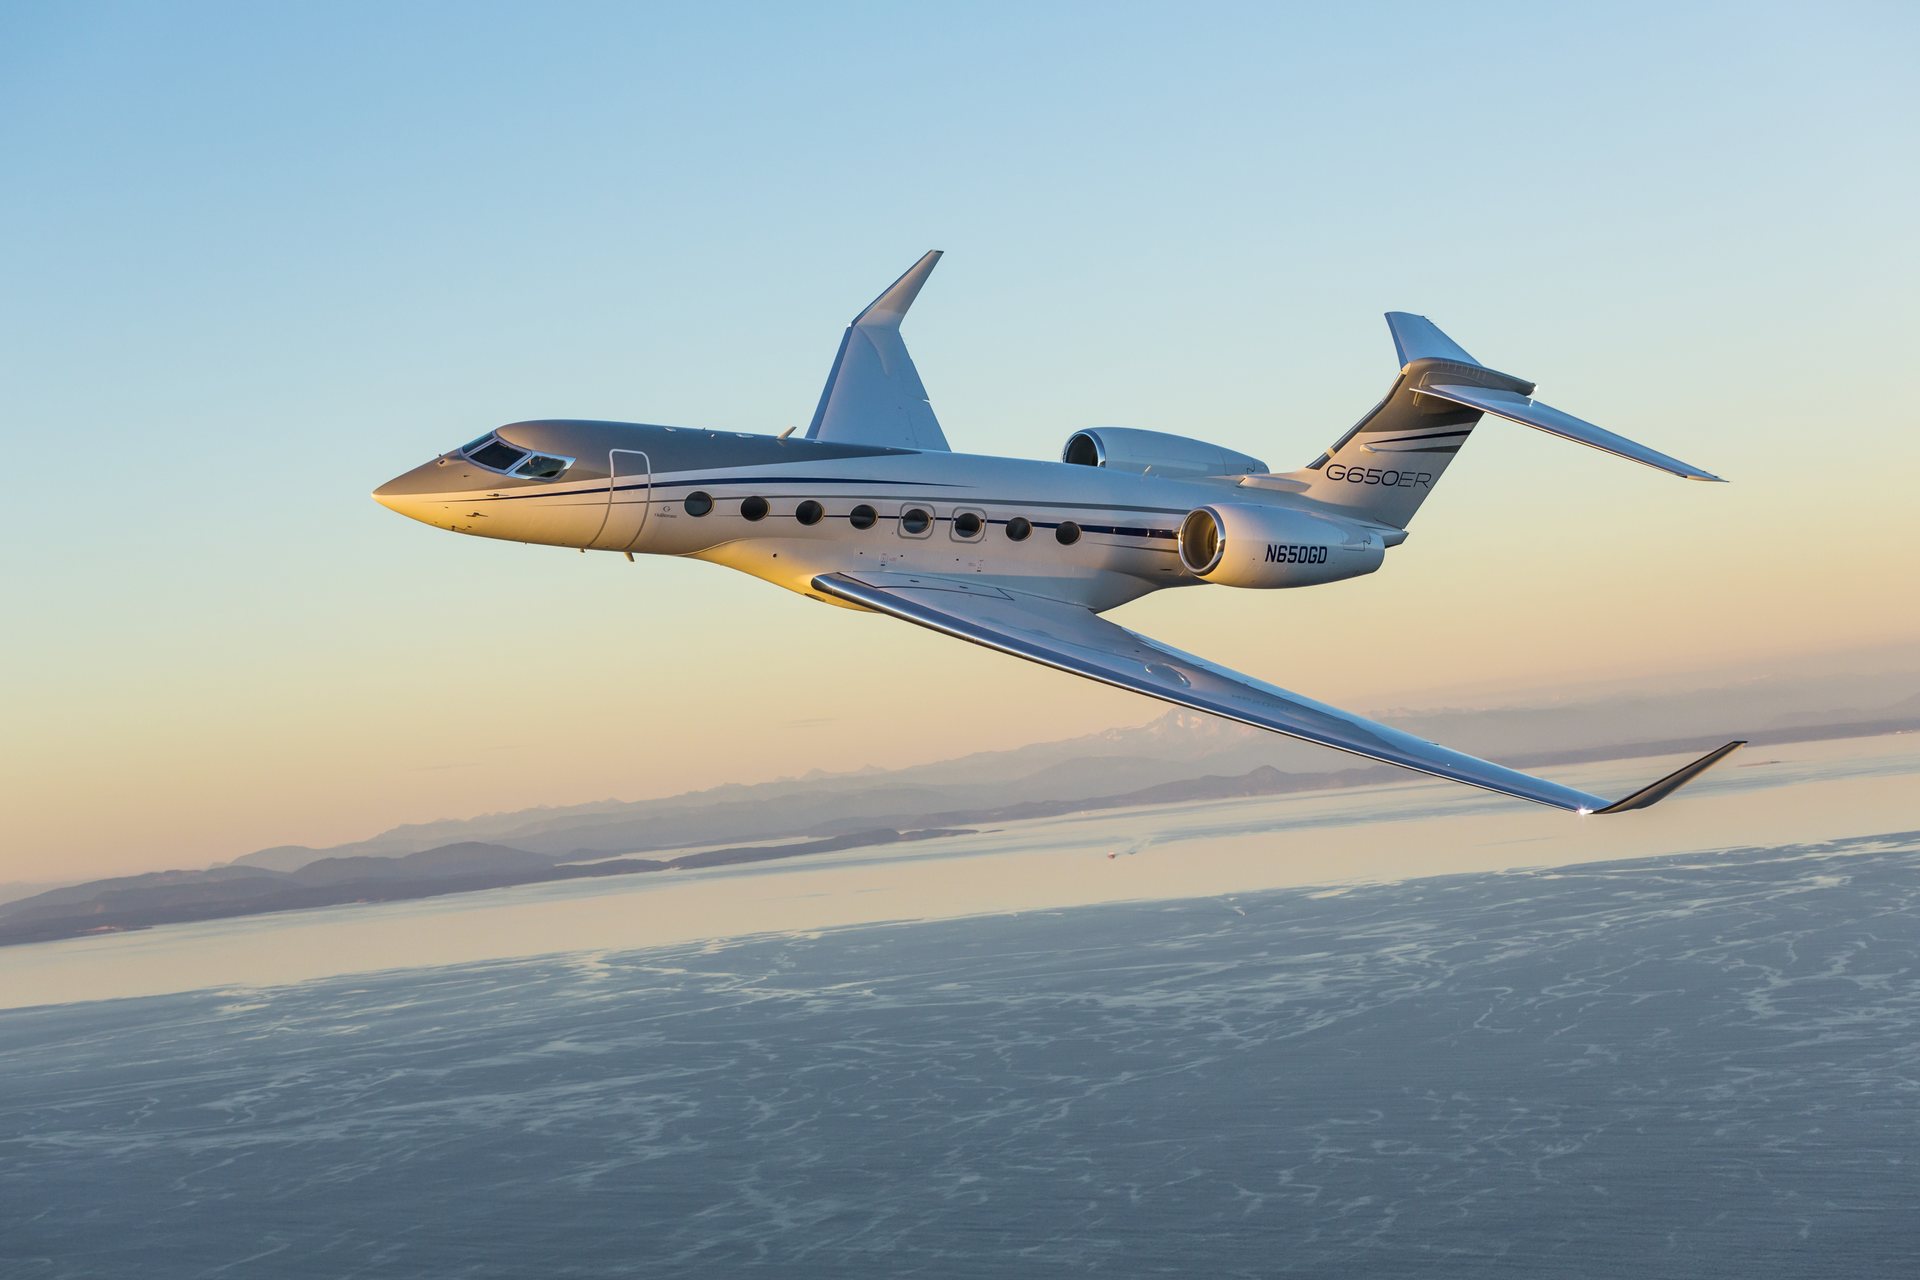 360 VR Virtual Tours of the Gulfstream G650ER